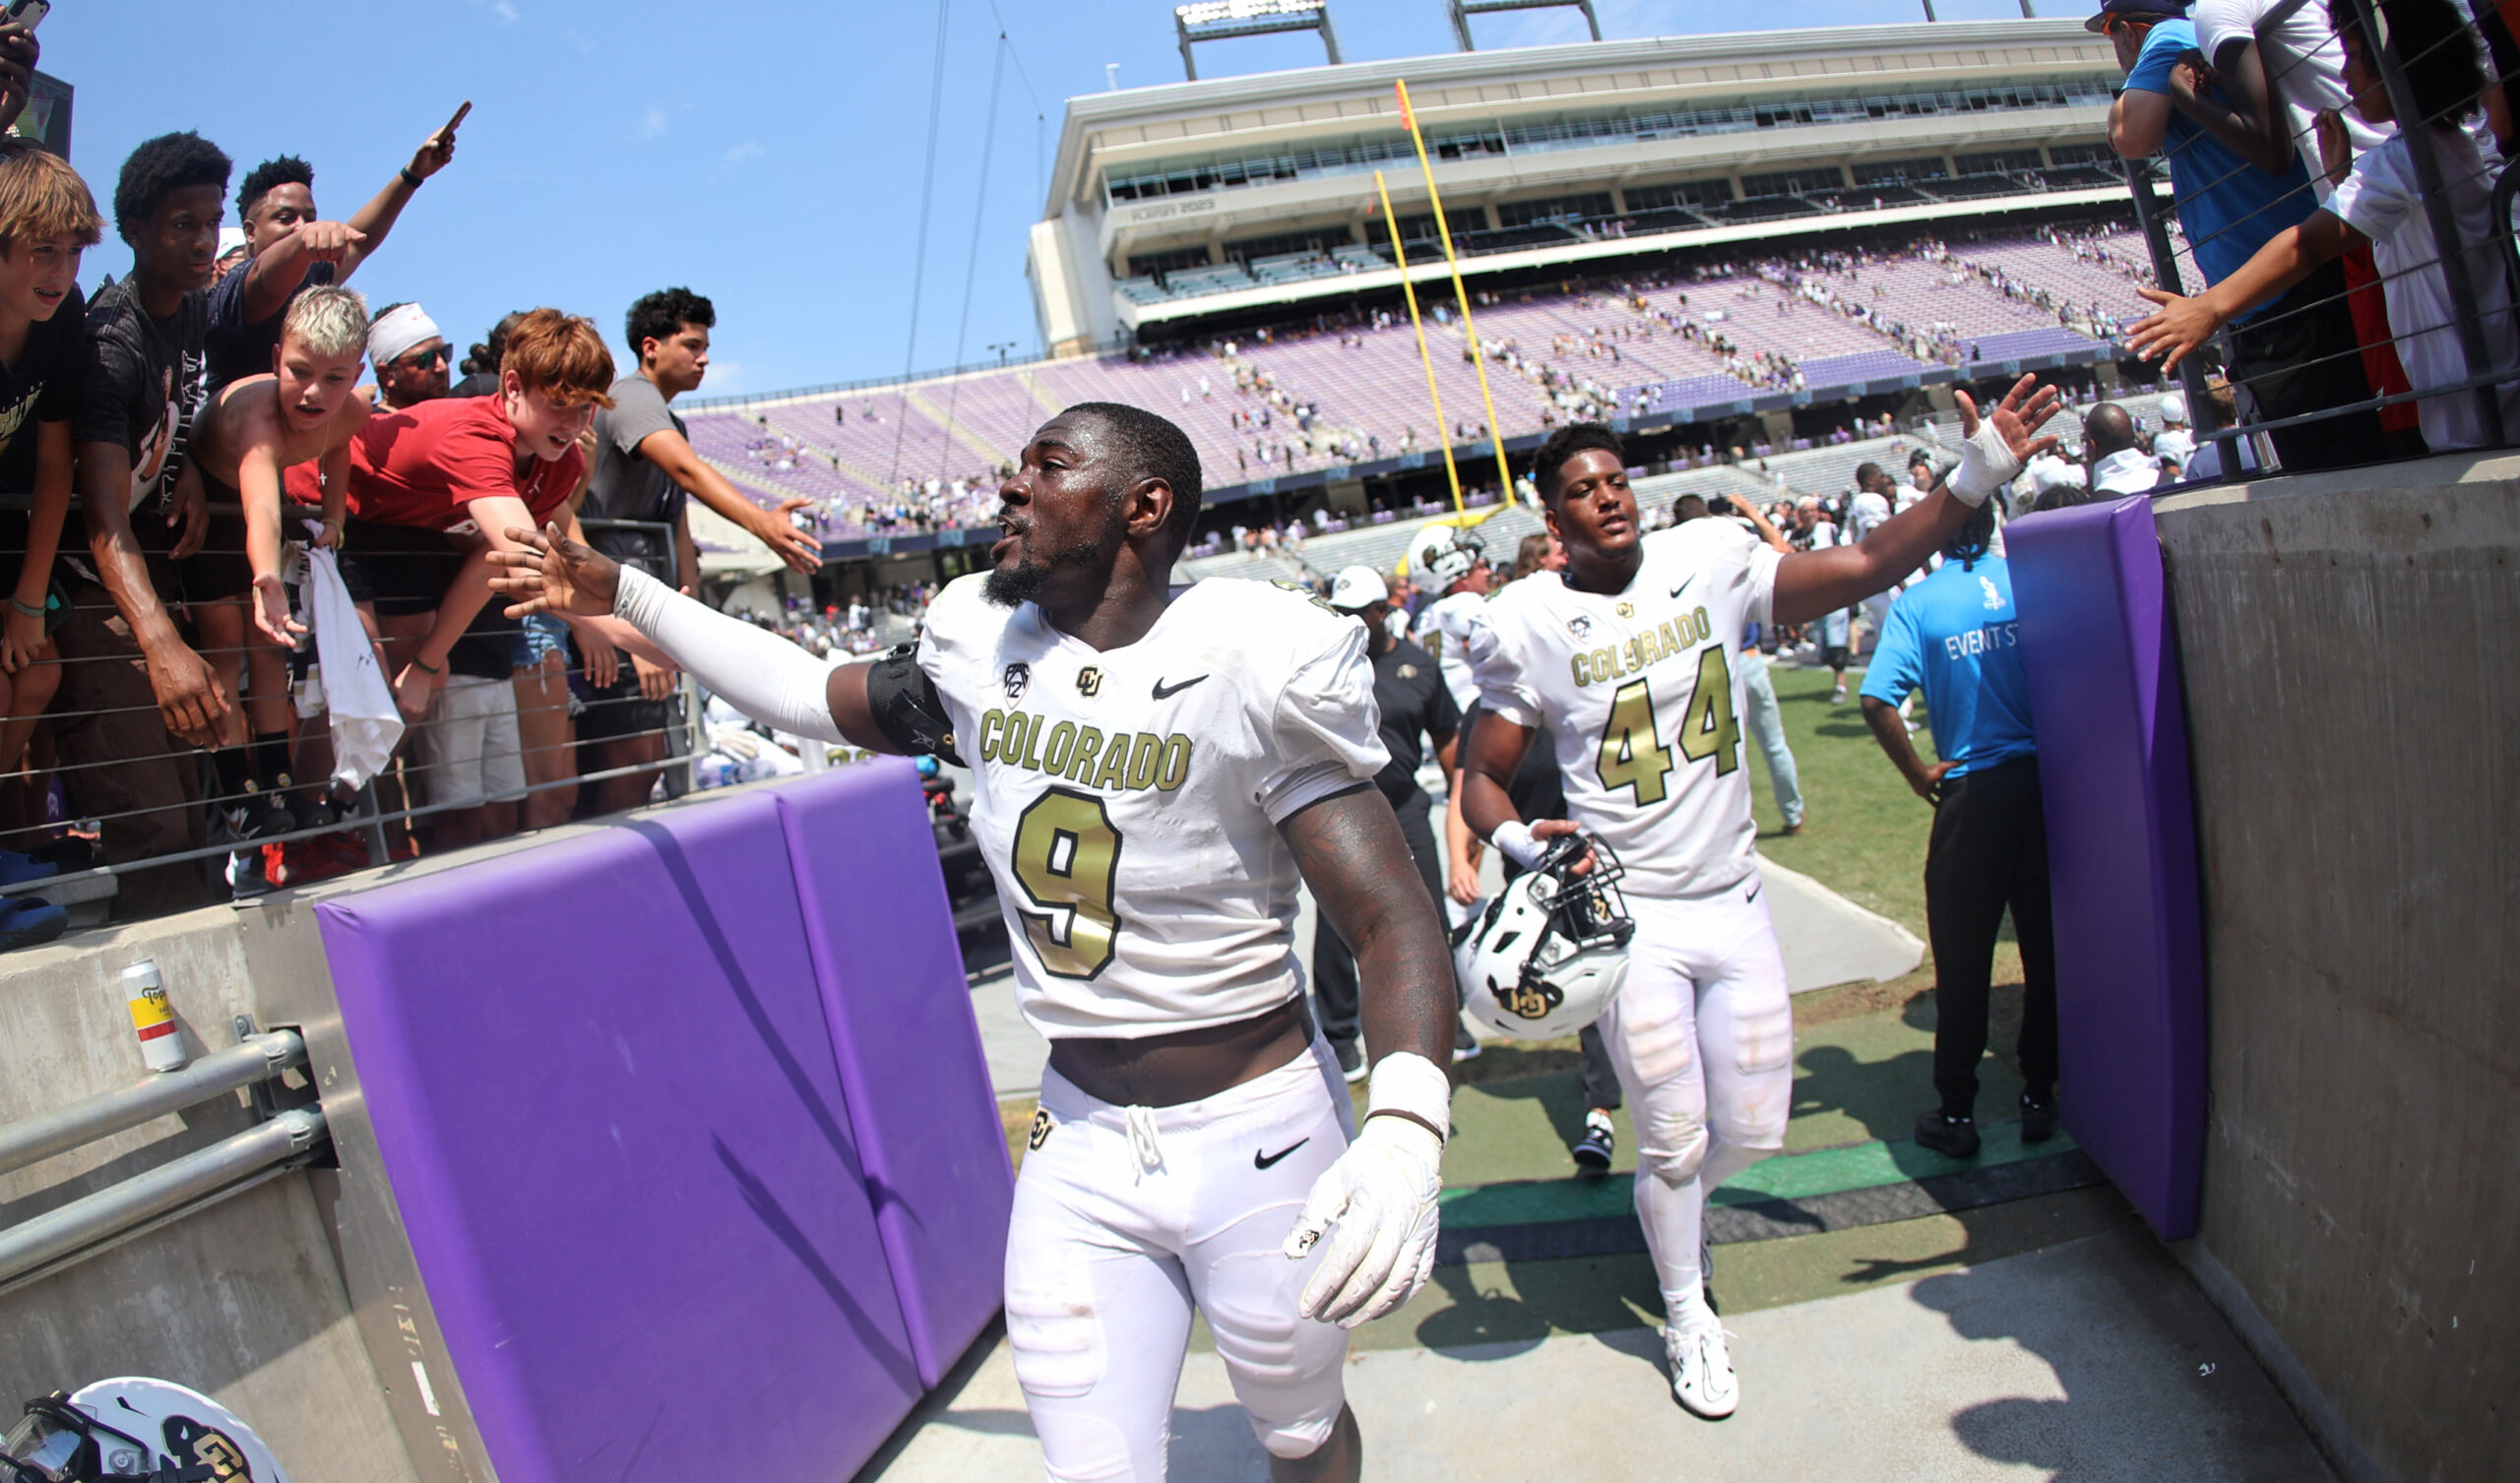 Buffaloes upset Horned Frogs...